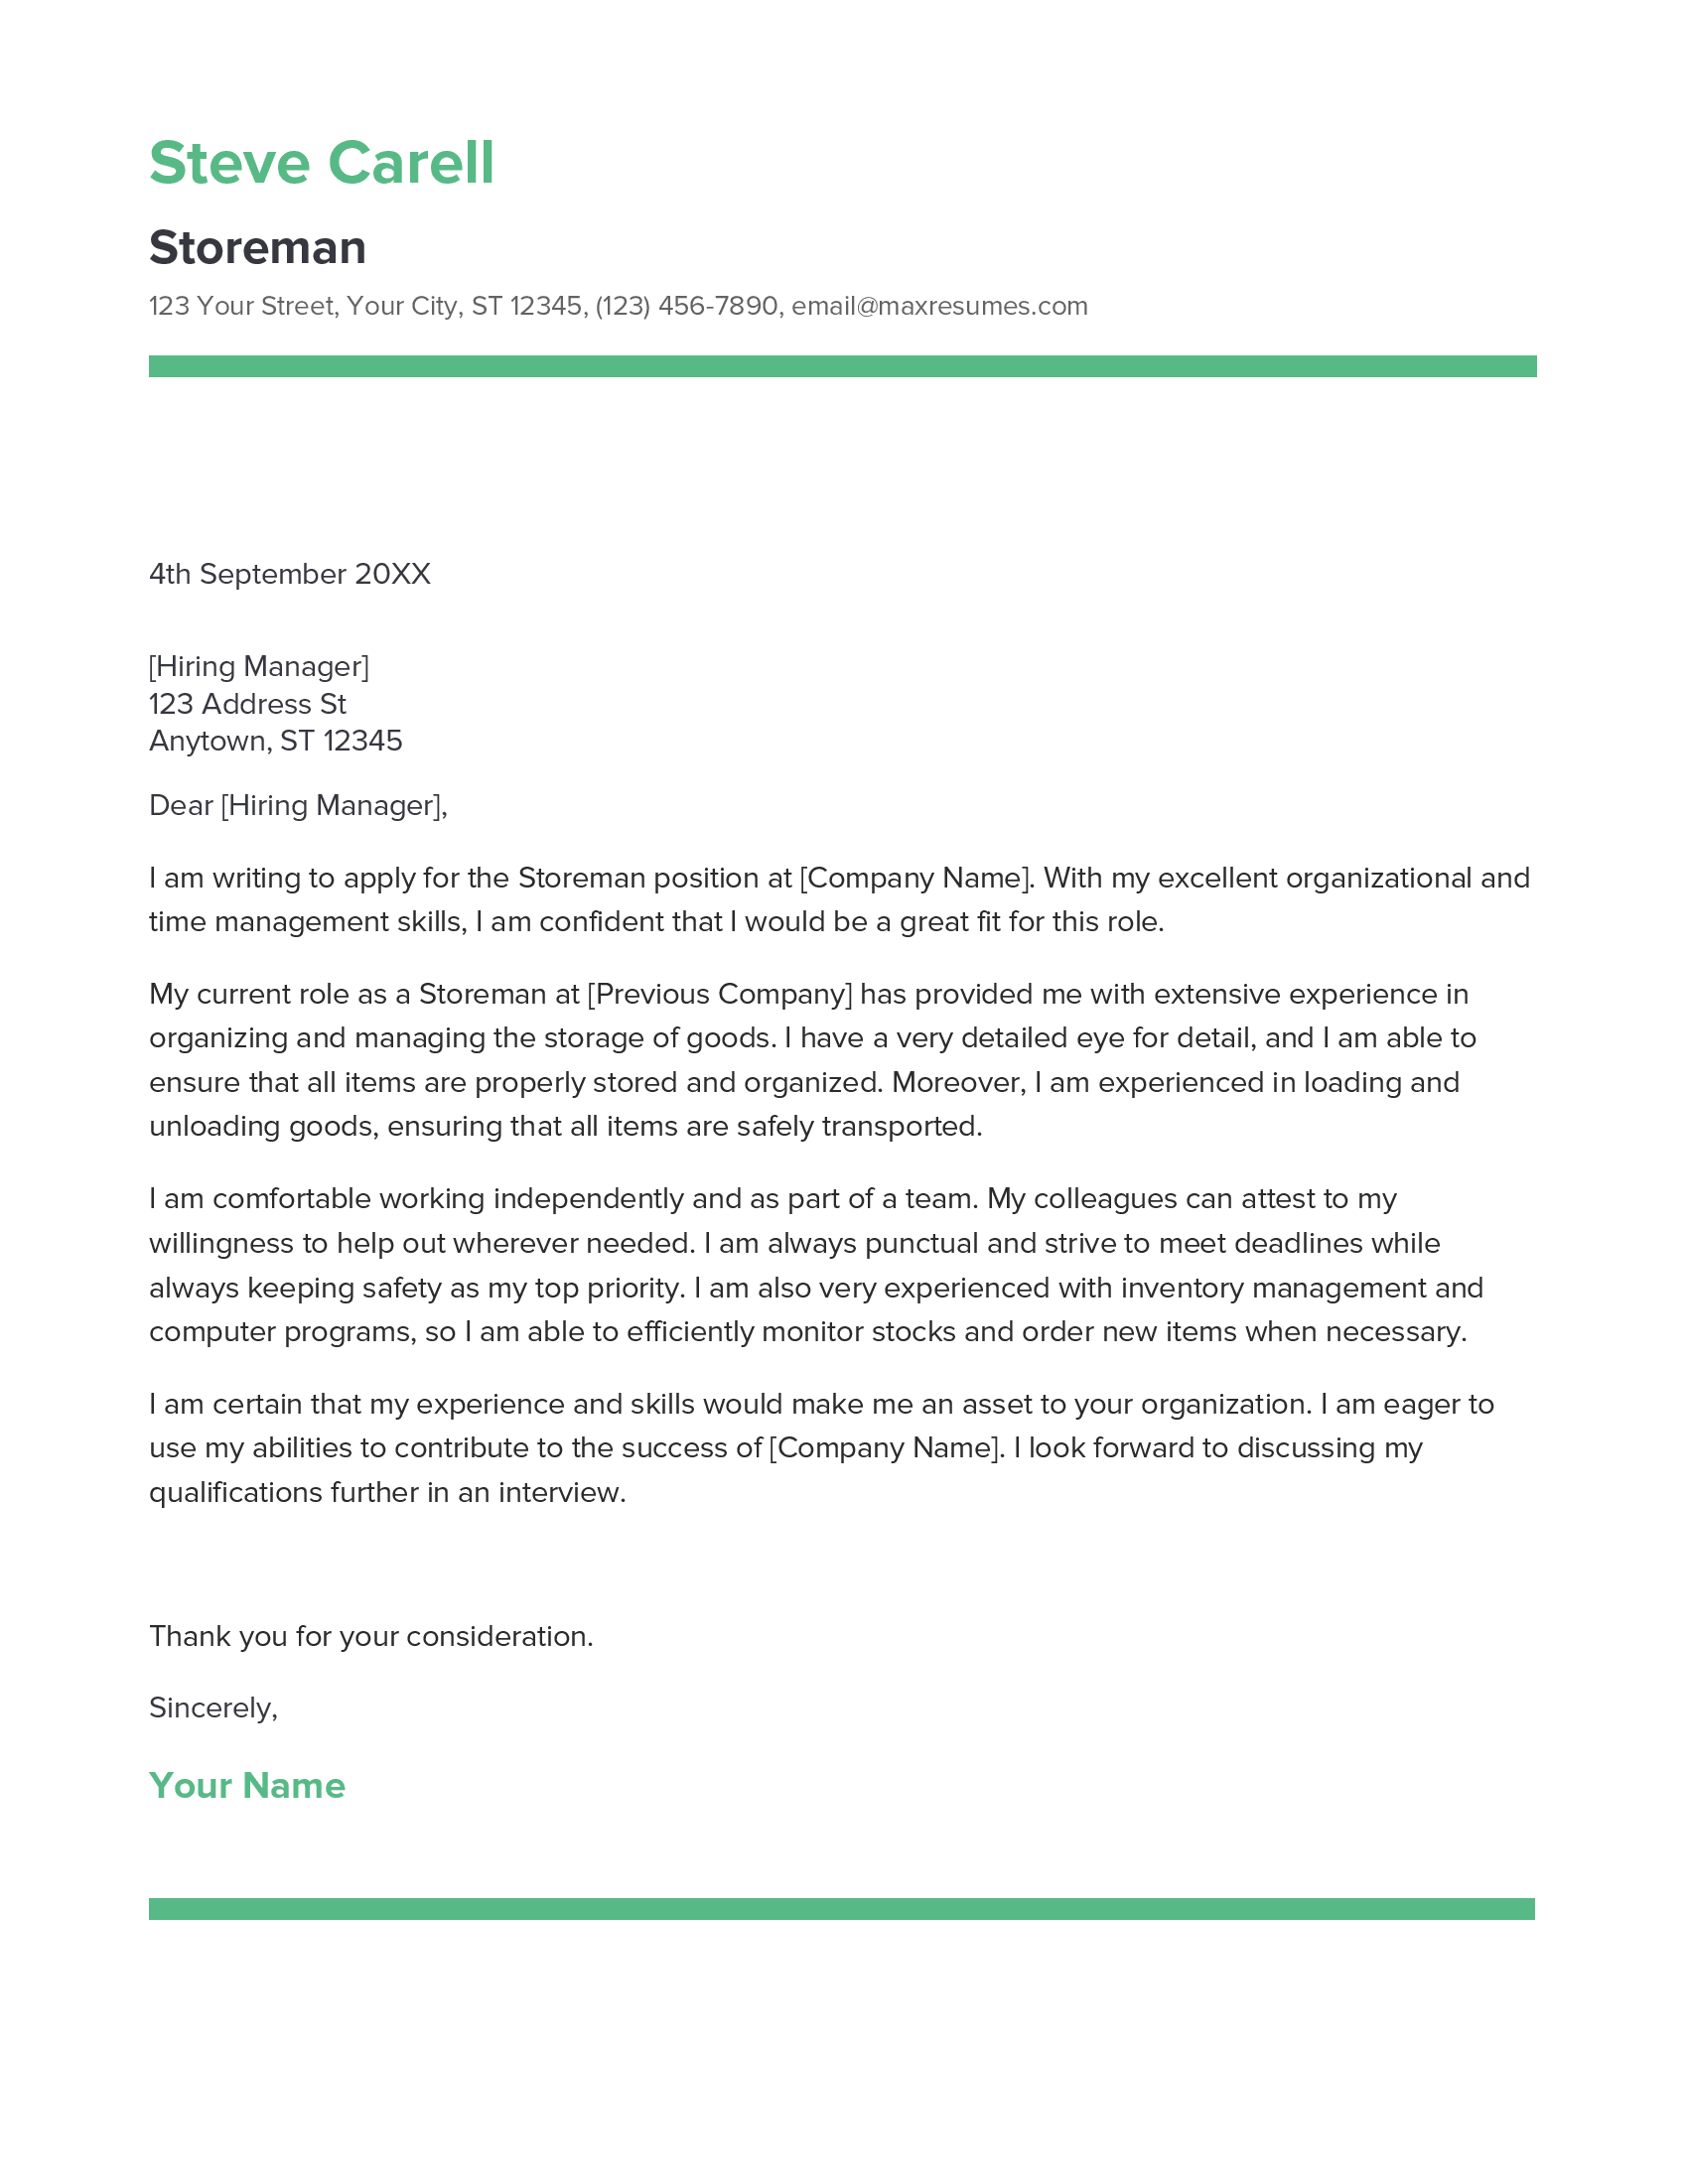 Storeman Cover Letter Example